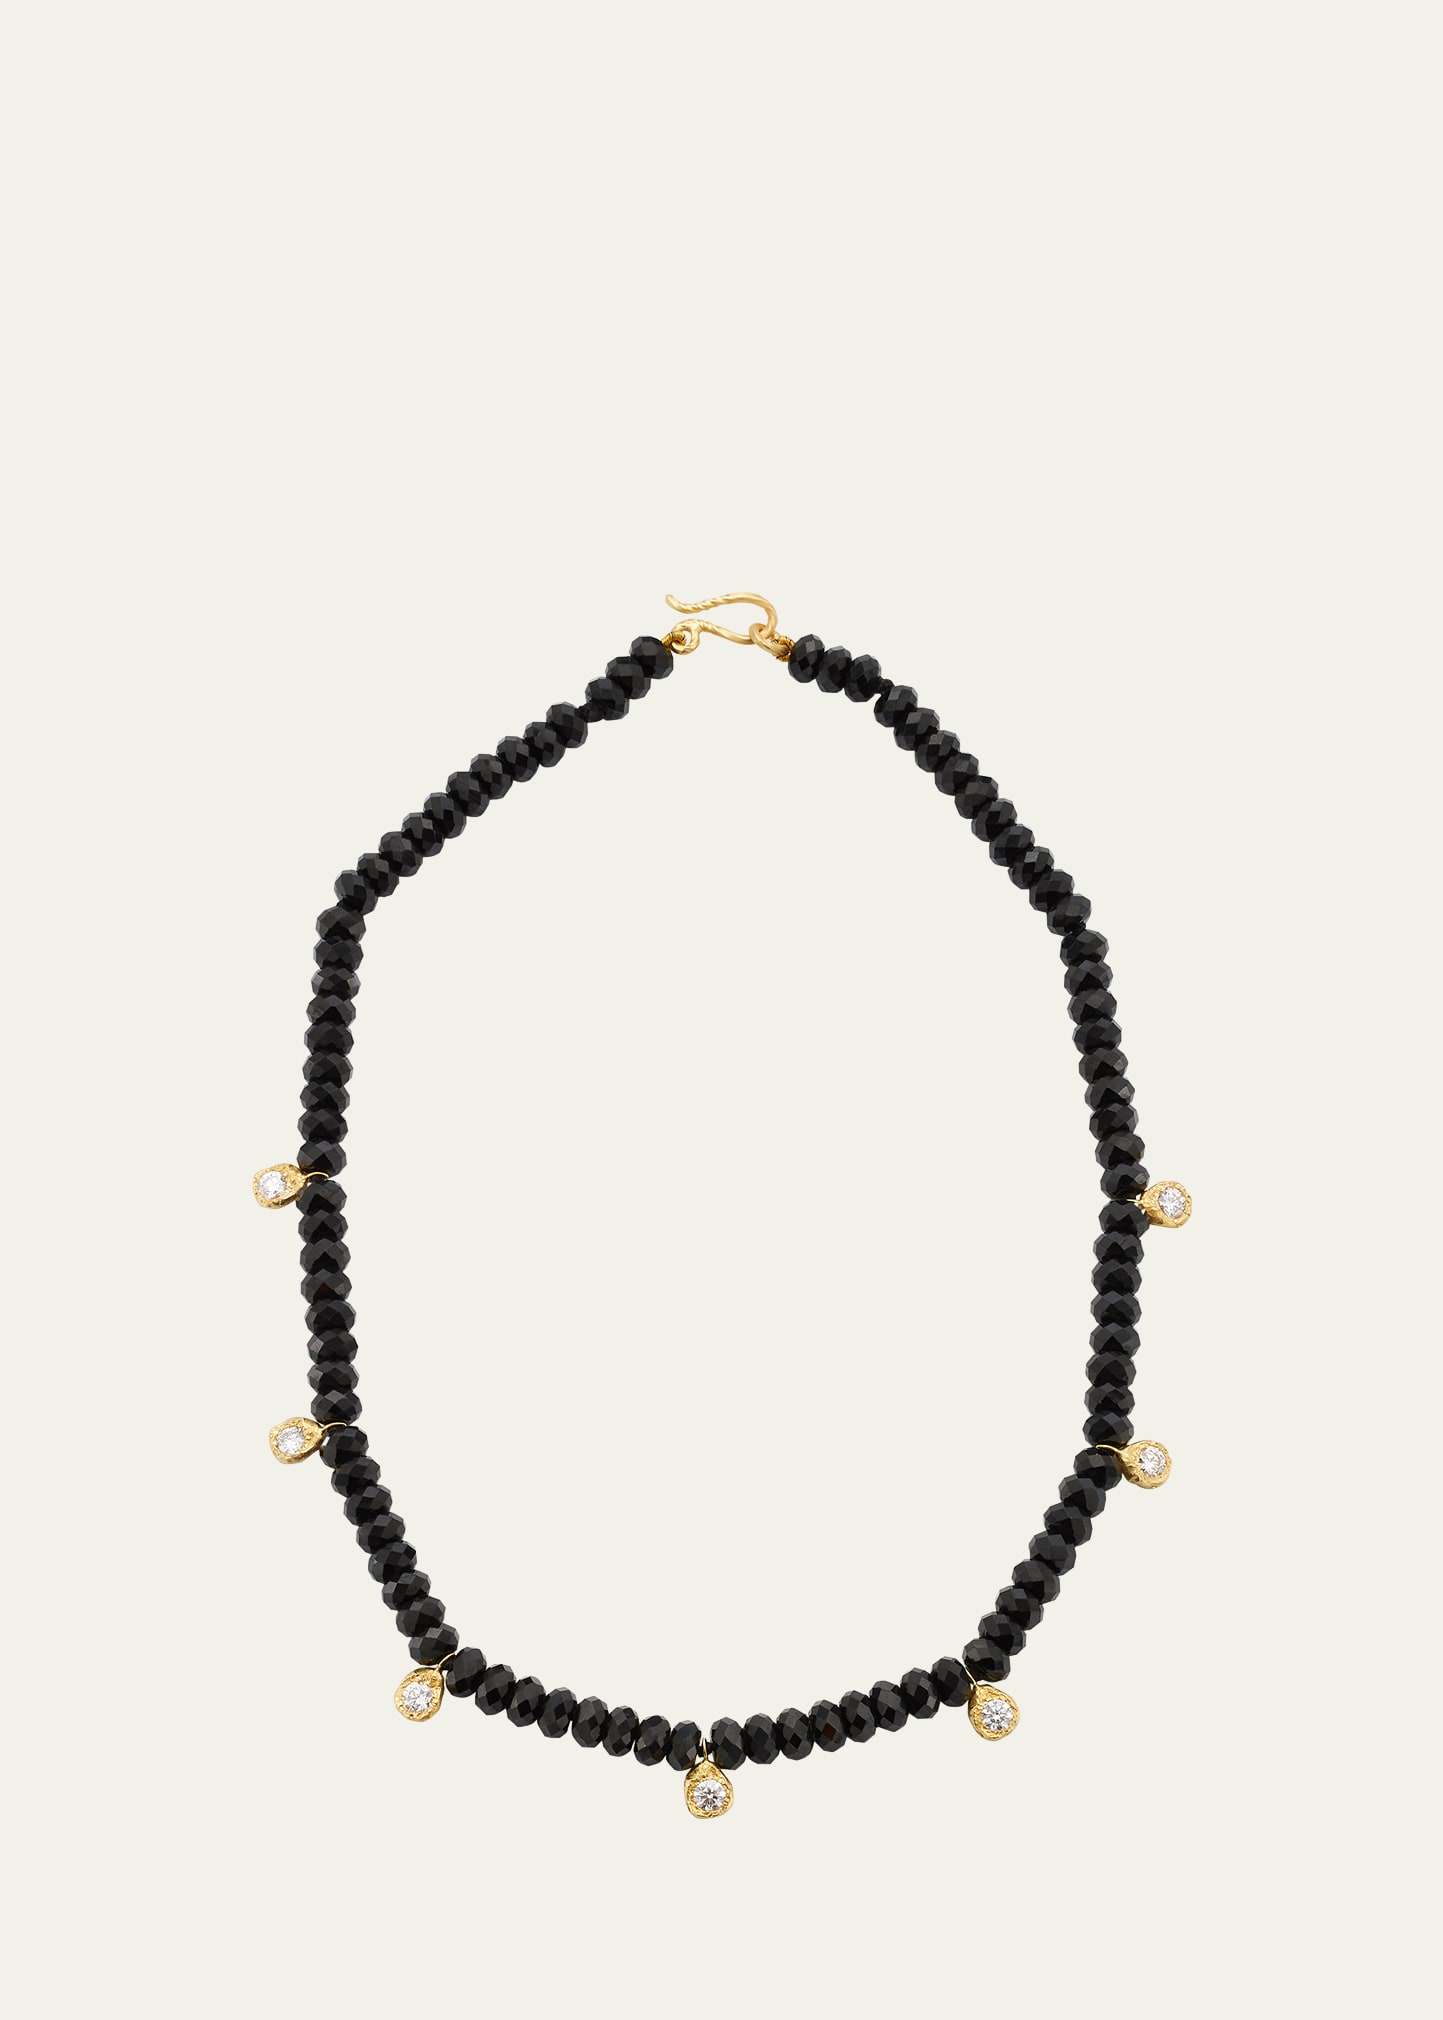 Elhanati Ramona Necklace in 18K Solid Yellow Gold with Black Spinel and Top Wesselton VVS Diamonds